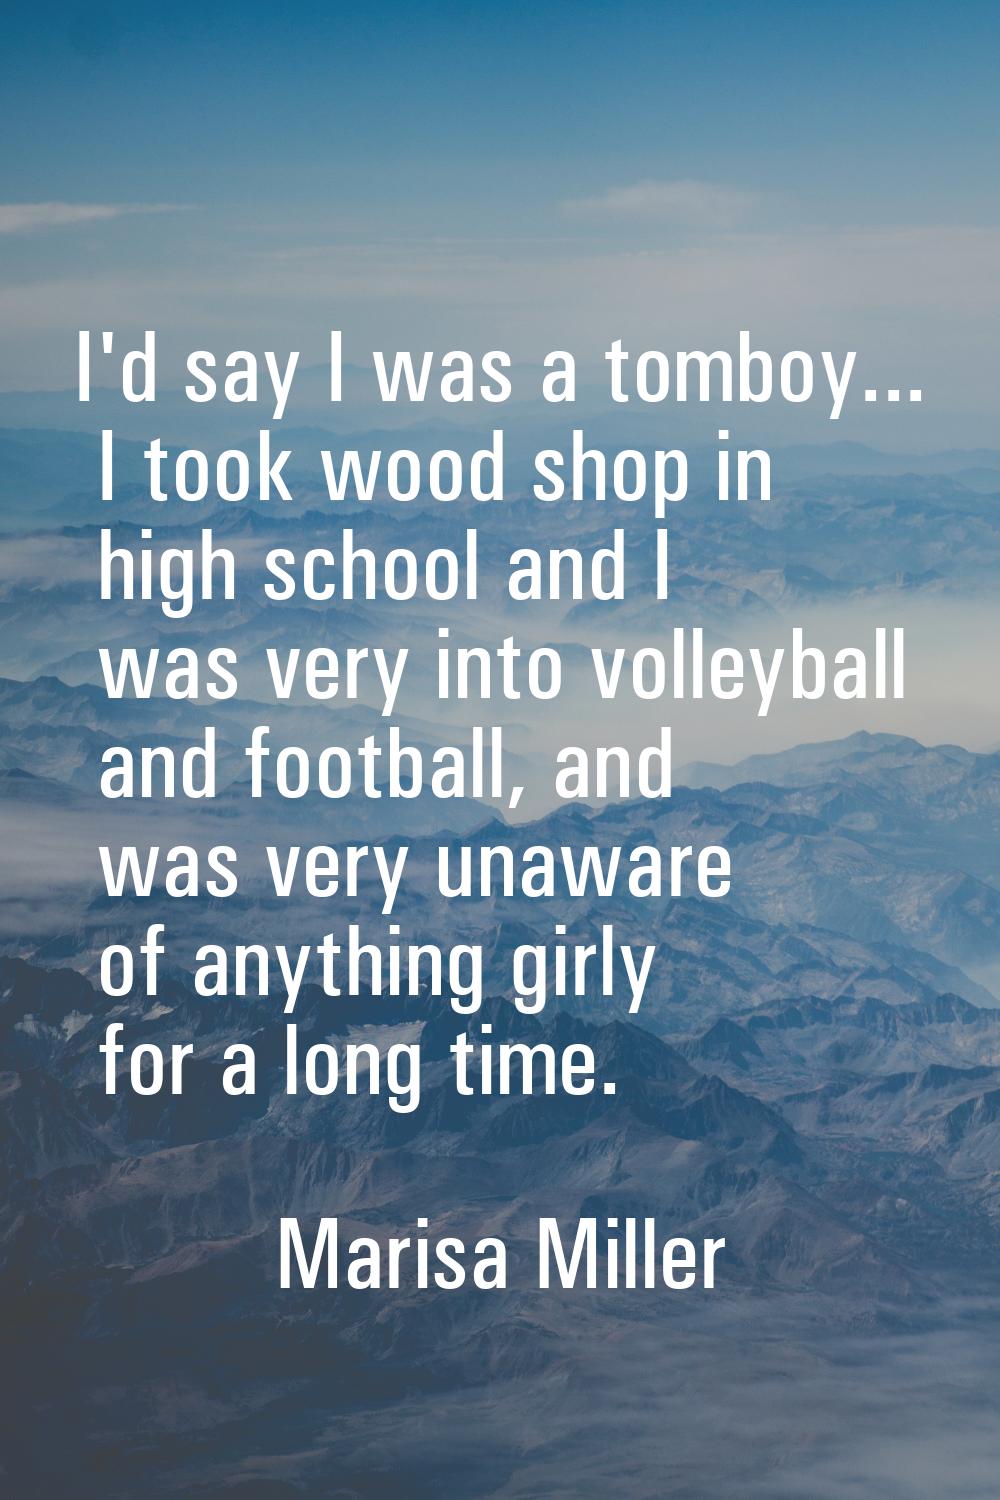 I'd say I was a tomboy... I took wood shop in high school and I was very into volleyball and footba